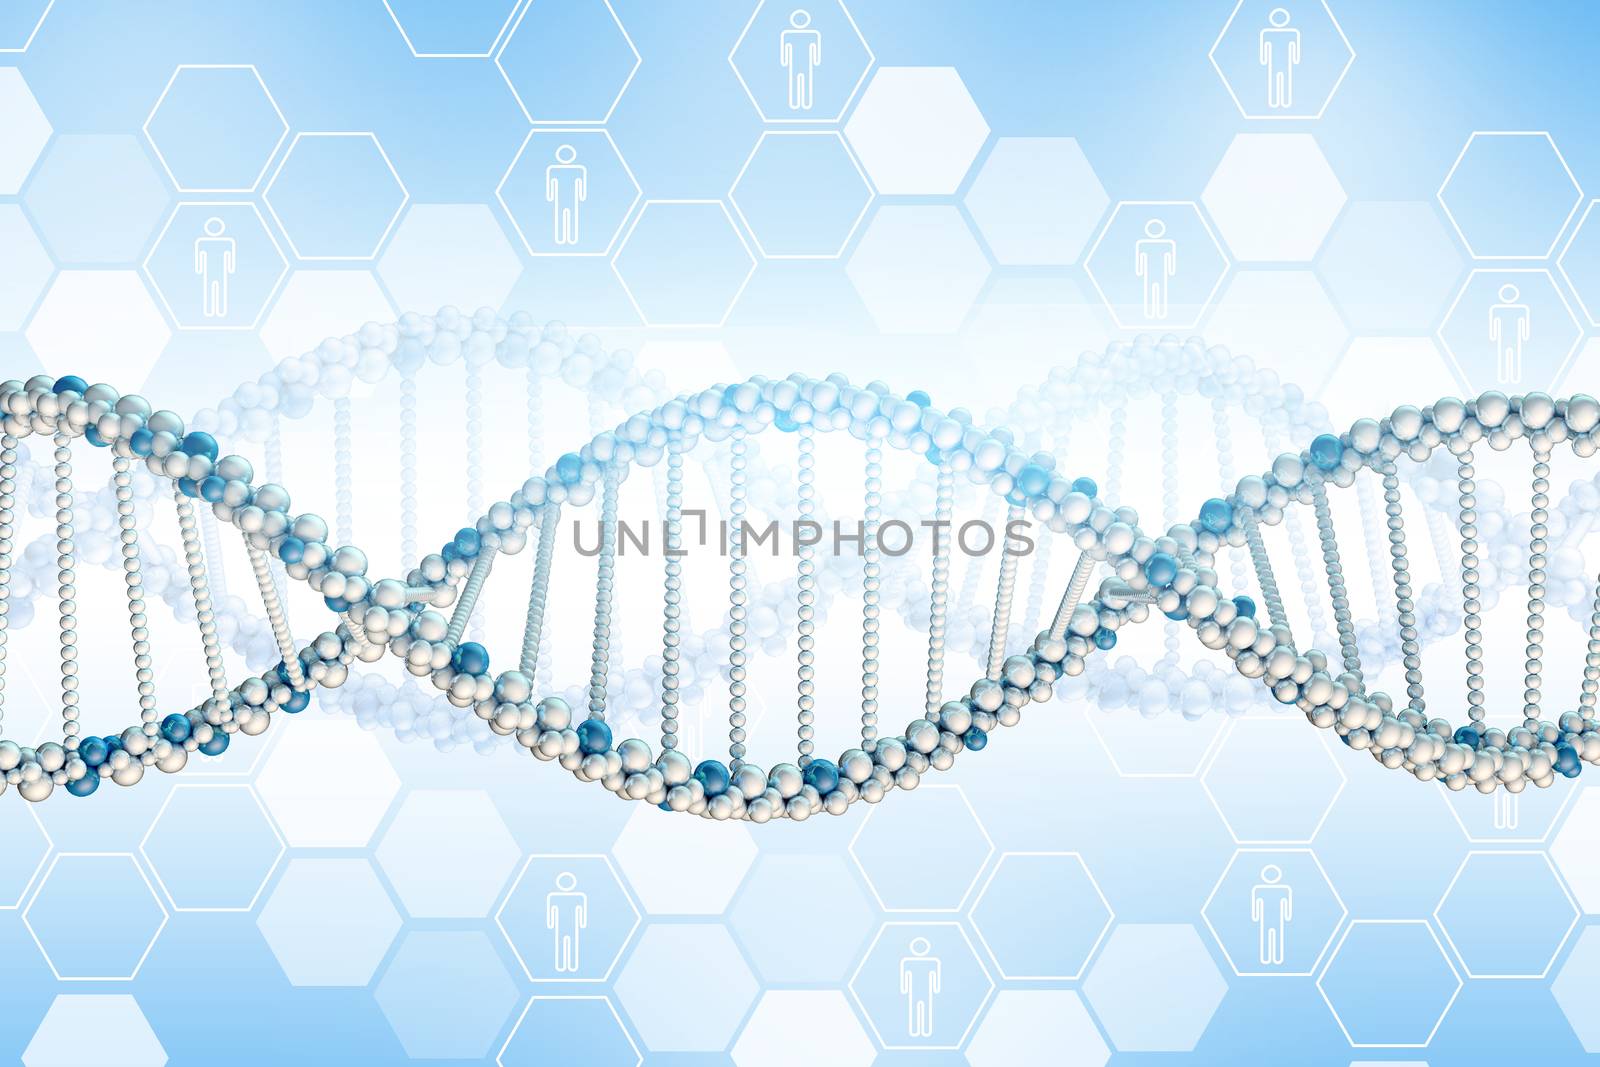 DNA model and hexagons with people icons. Blue gradient background